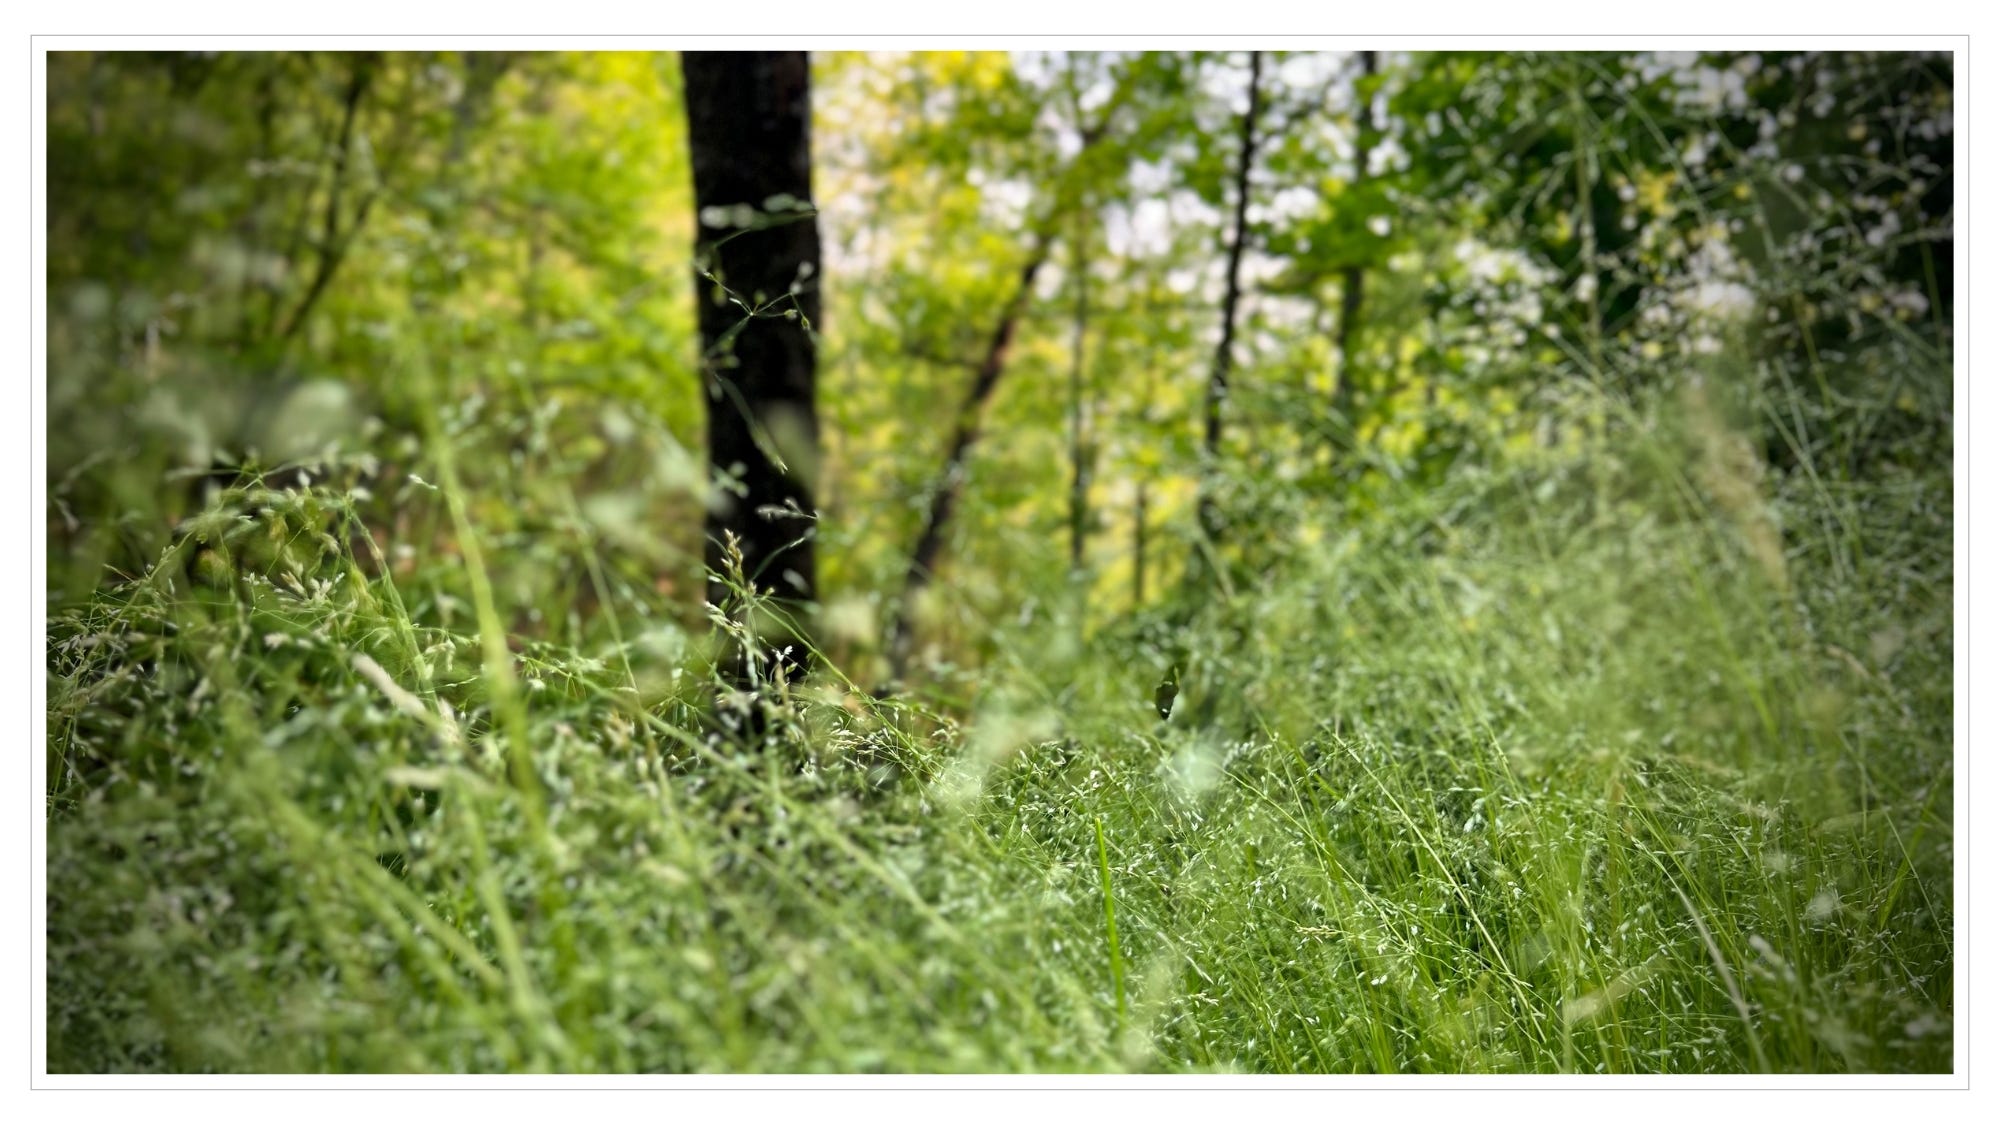 grasses in foreground, trees background, shallow depth of field, late afternoon light